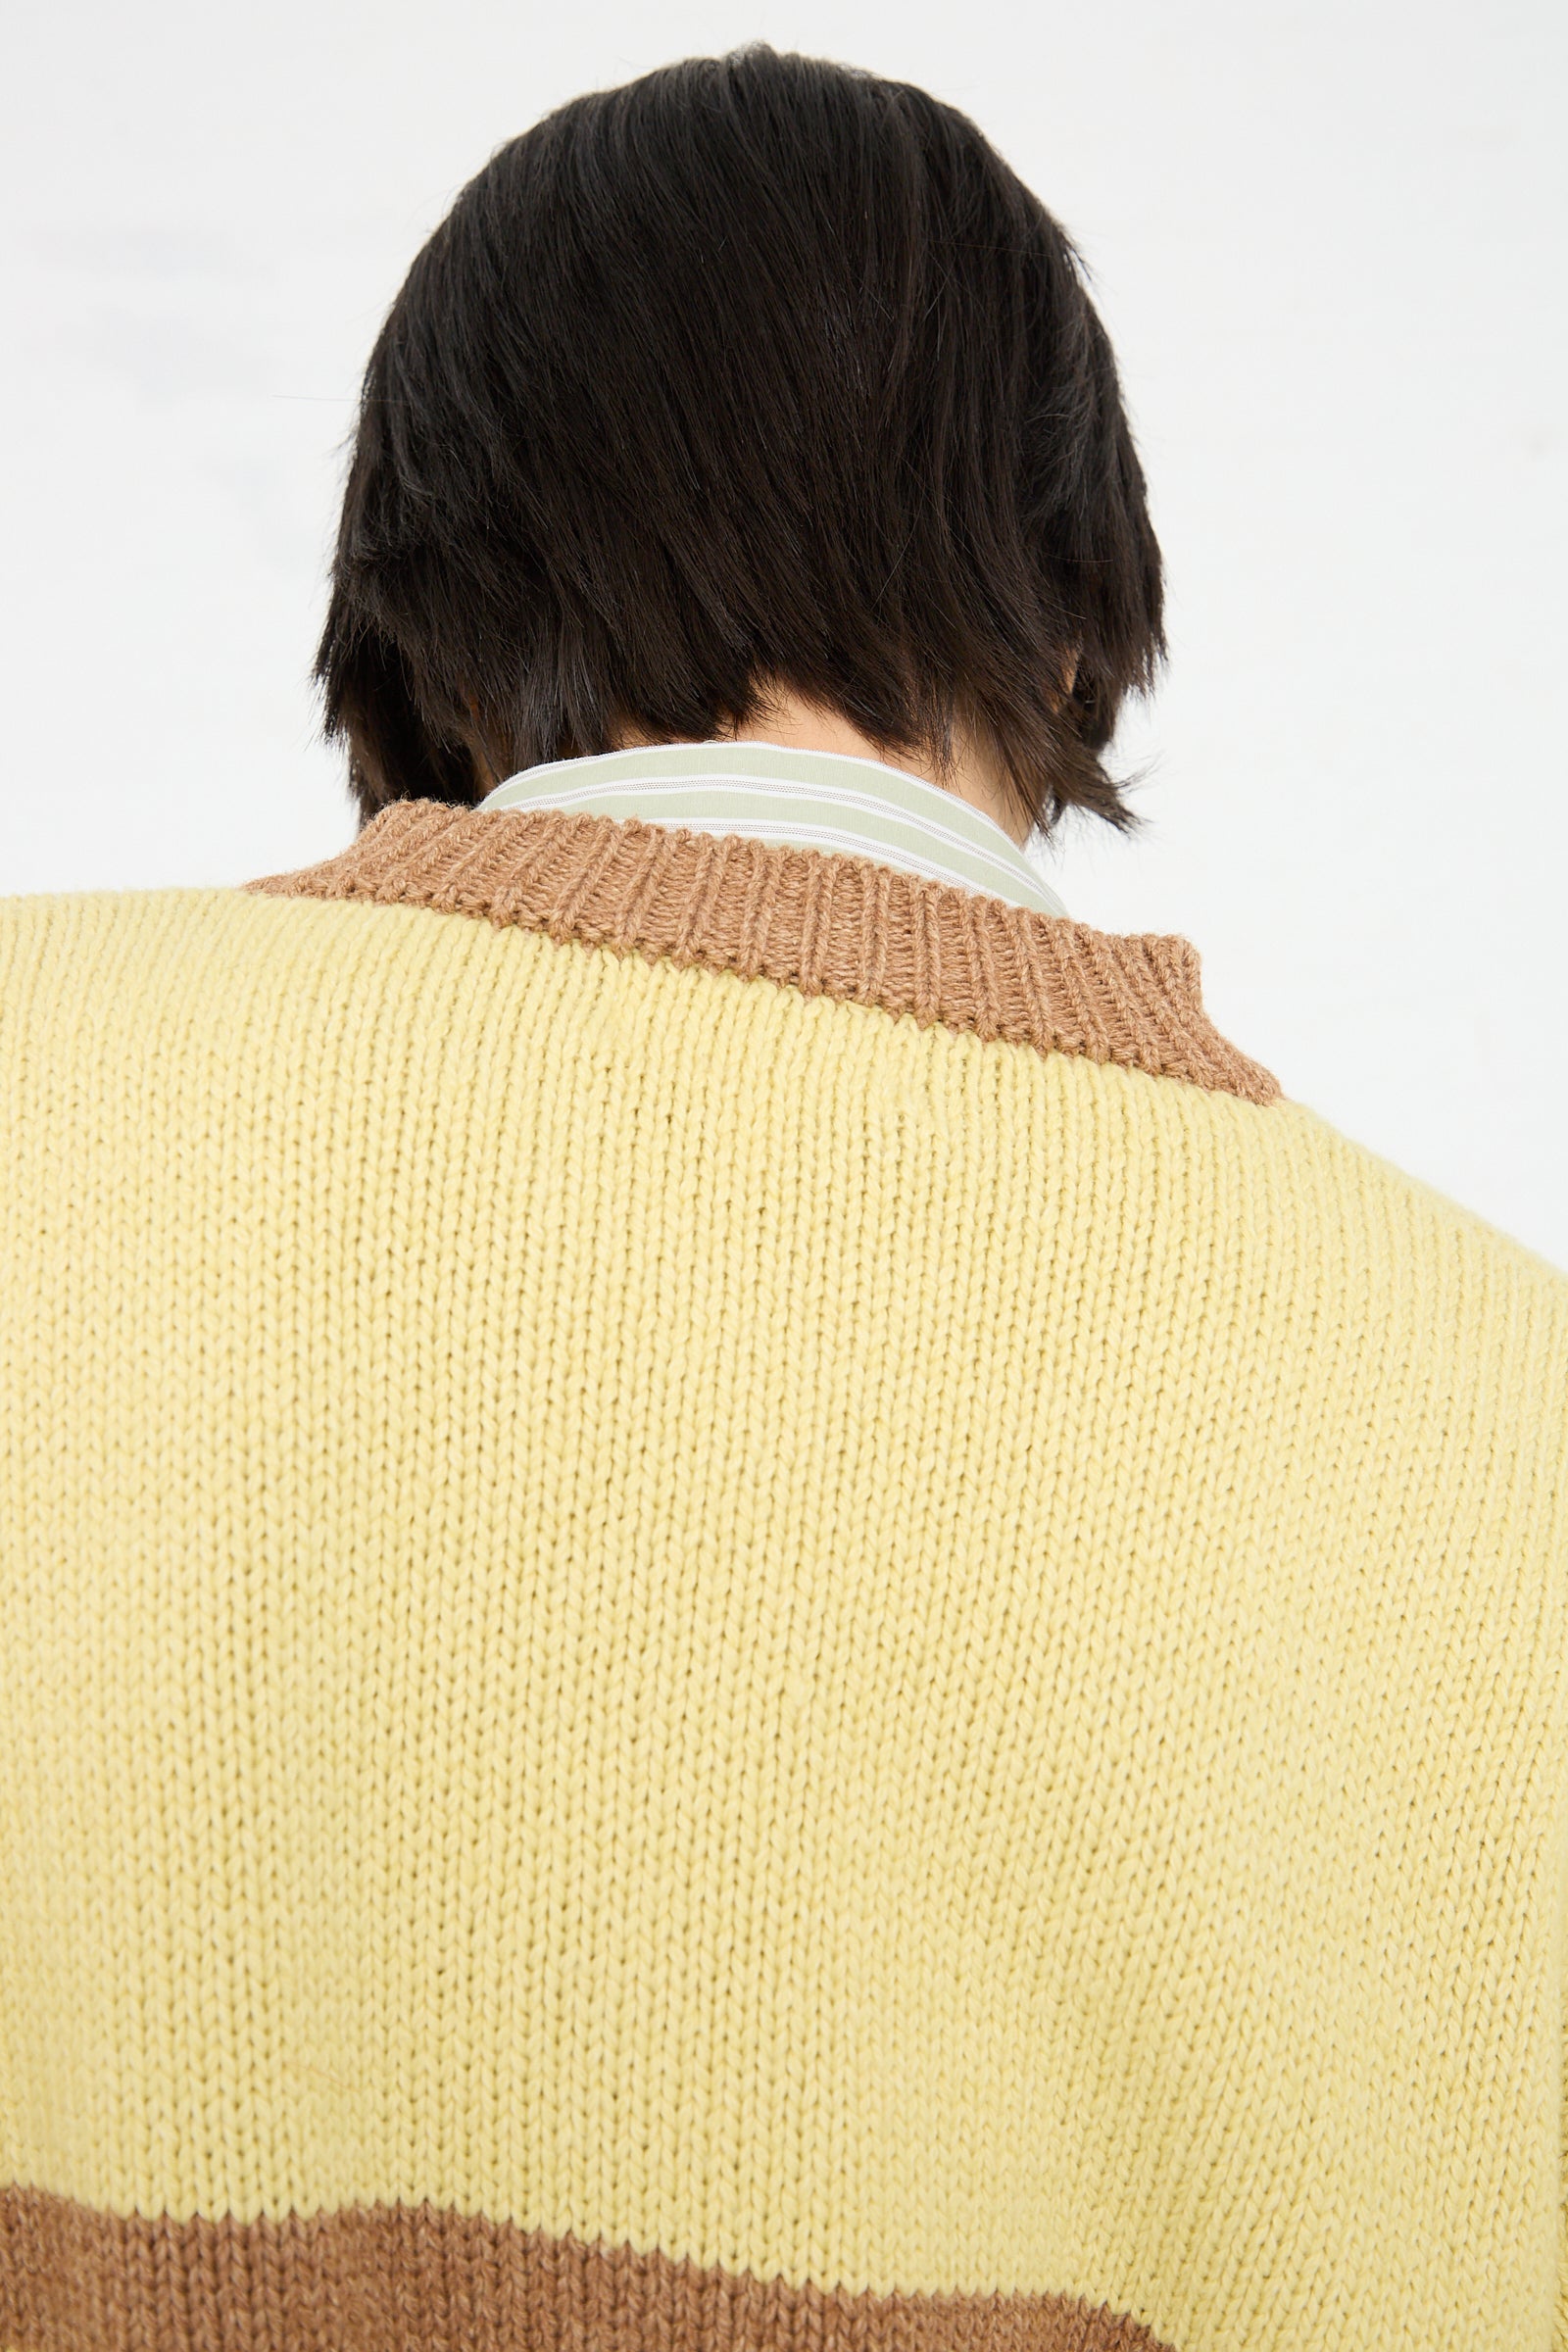 Person with dark hair wearing a yellow Cawley Lambswool sweater with brown stripes, viewed from behind.